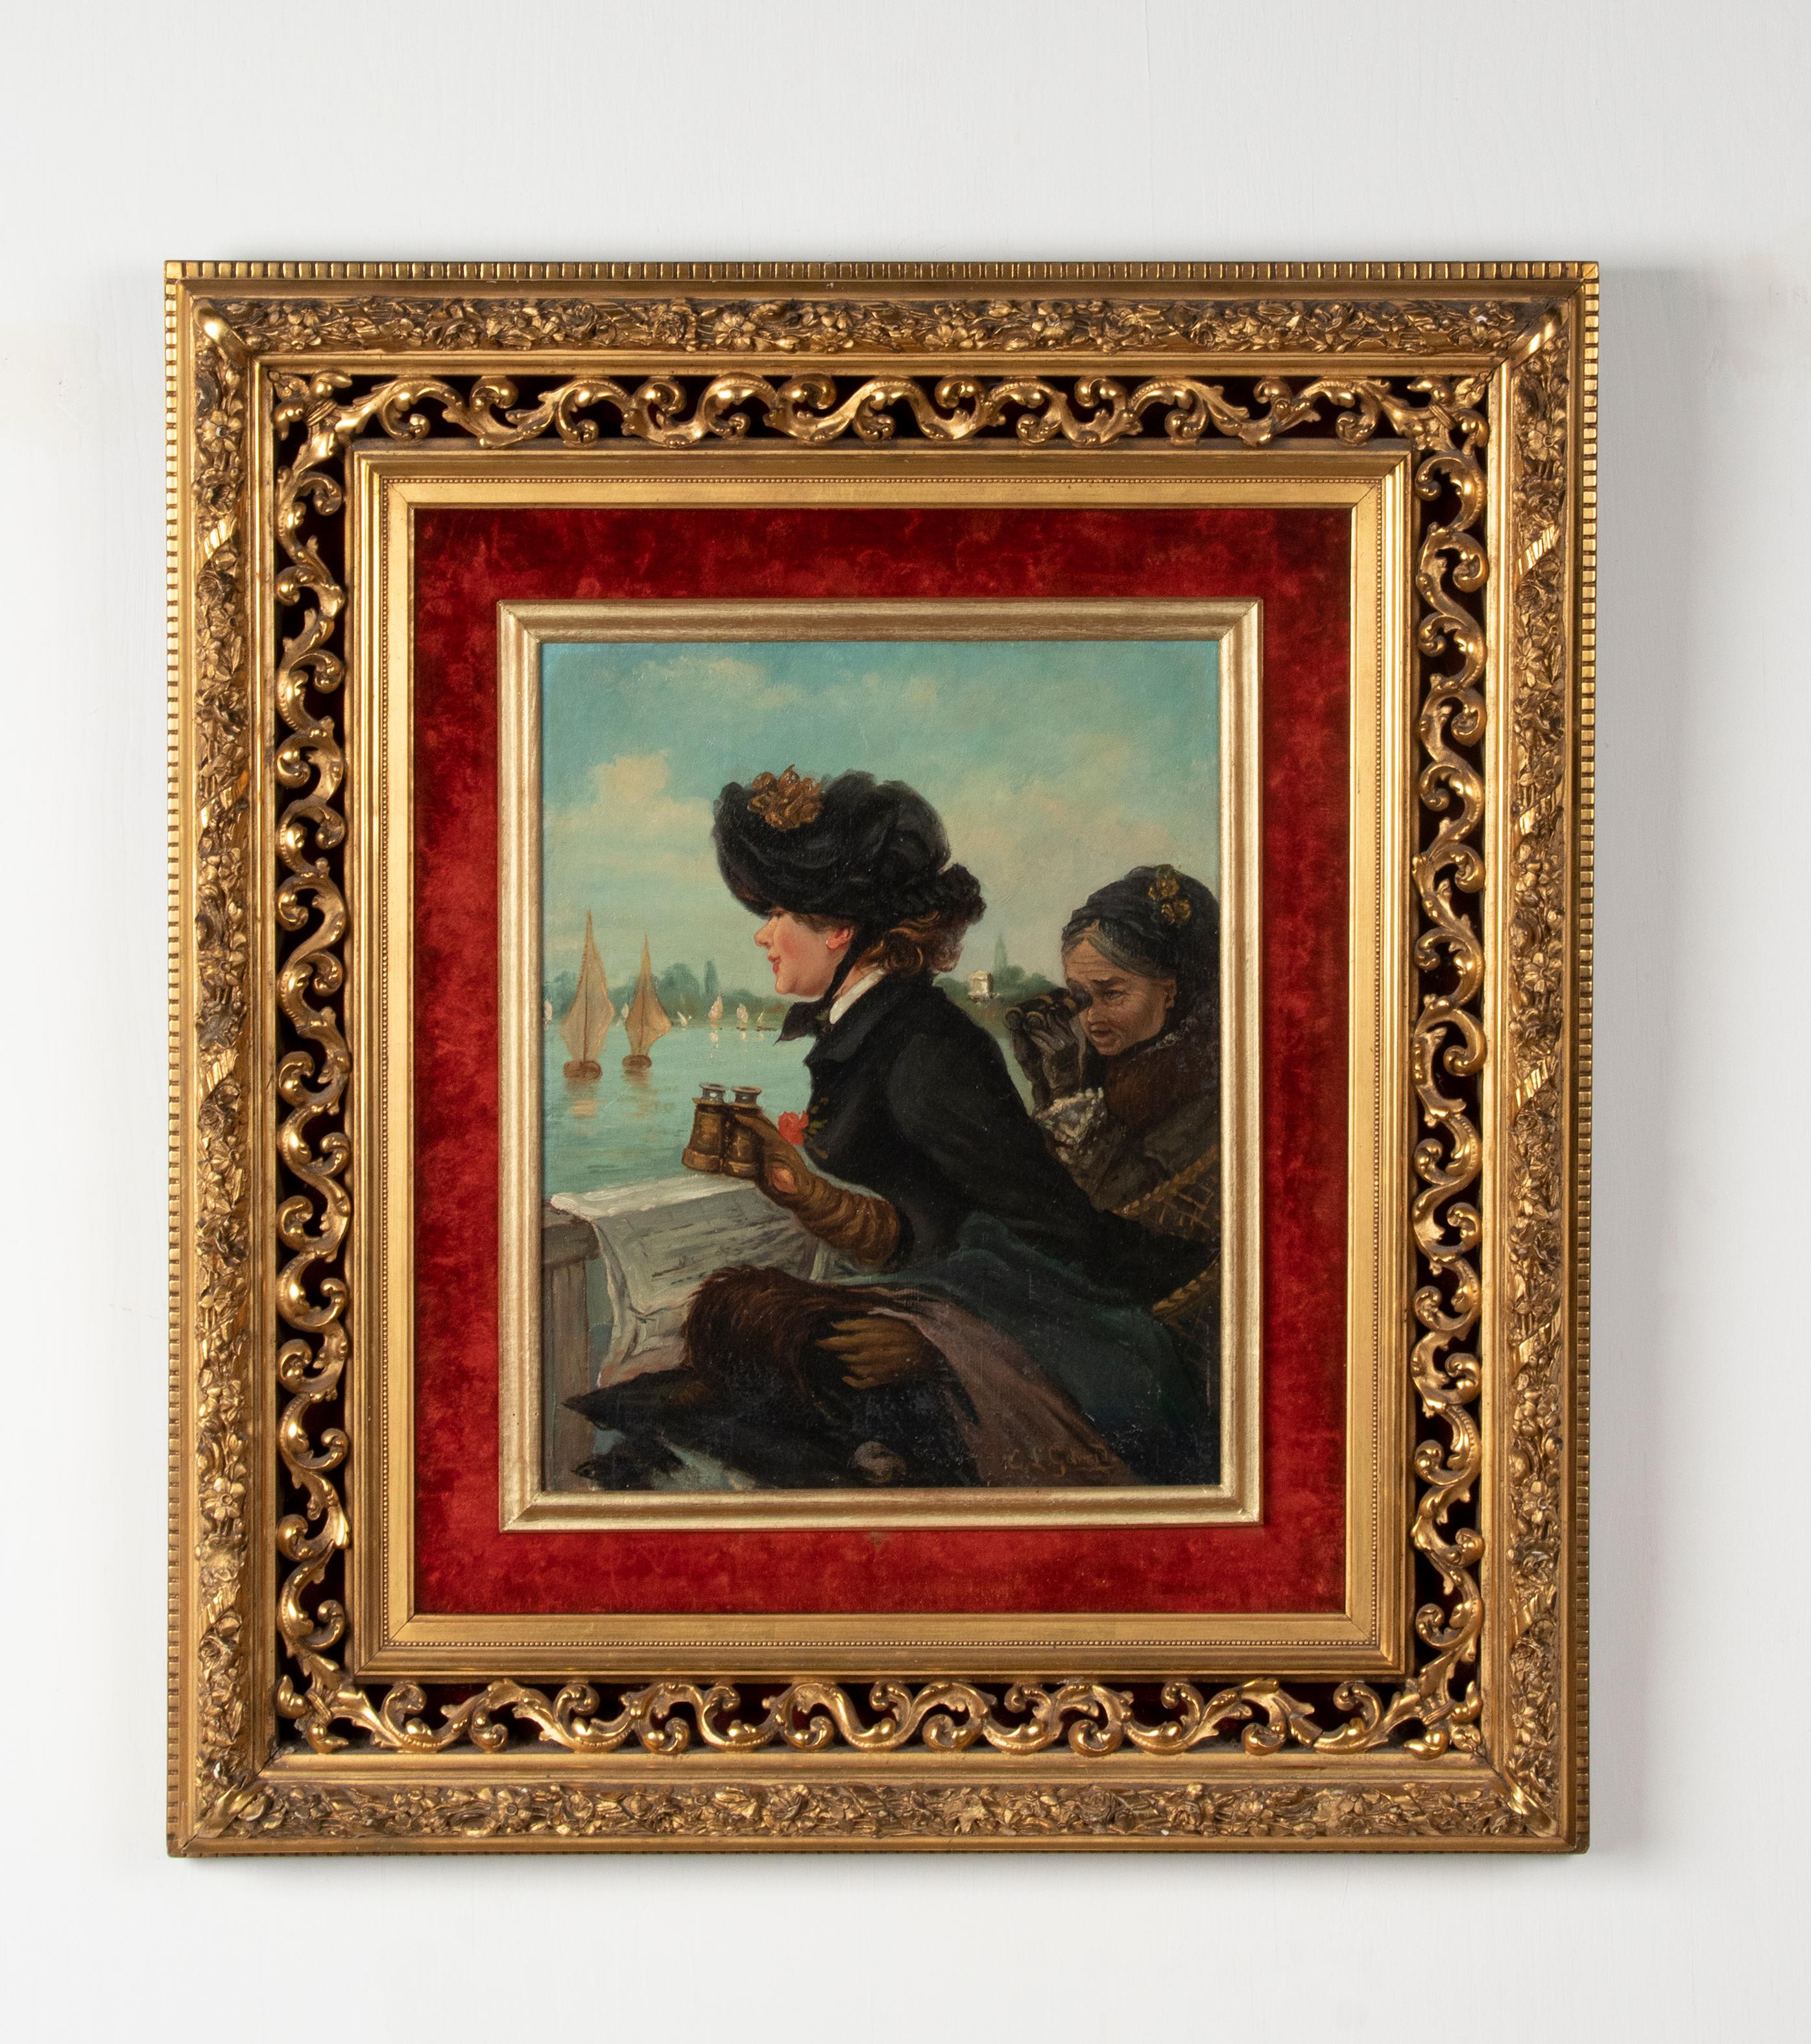 A romantic painting depicting two women sitting on the shore of a lake, looking at the sailboats. It is painted with oil on canvas. The painting is signed with E.L. Garrido. However, this painting was not painted by this Spanish master. But the